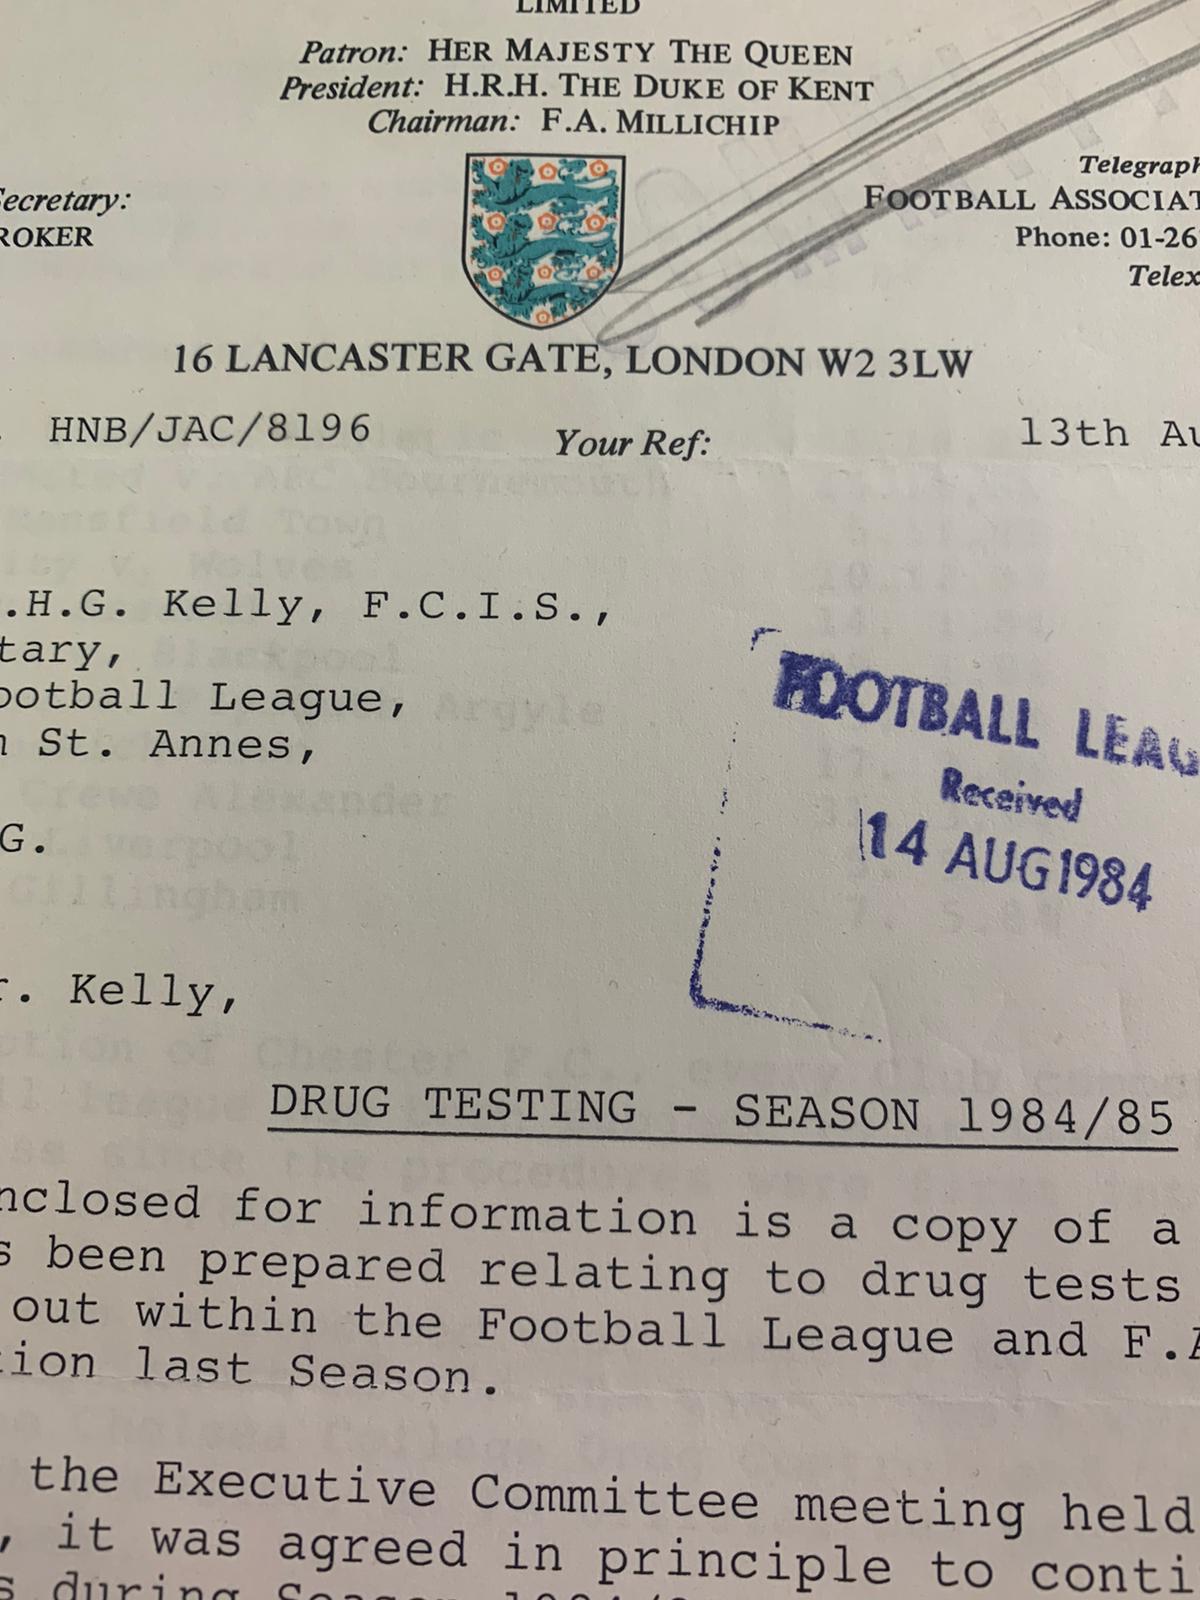 Two Official Football Association Letters Regarding Drug Testing from 1984-1986